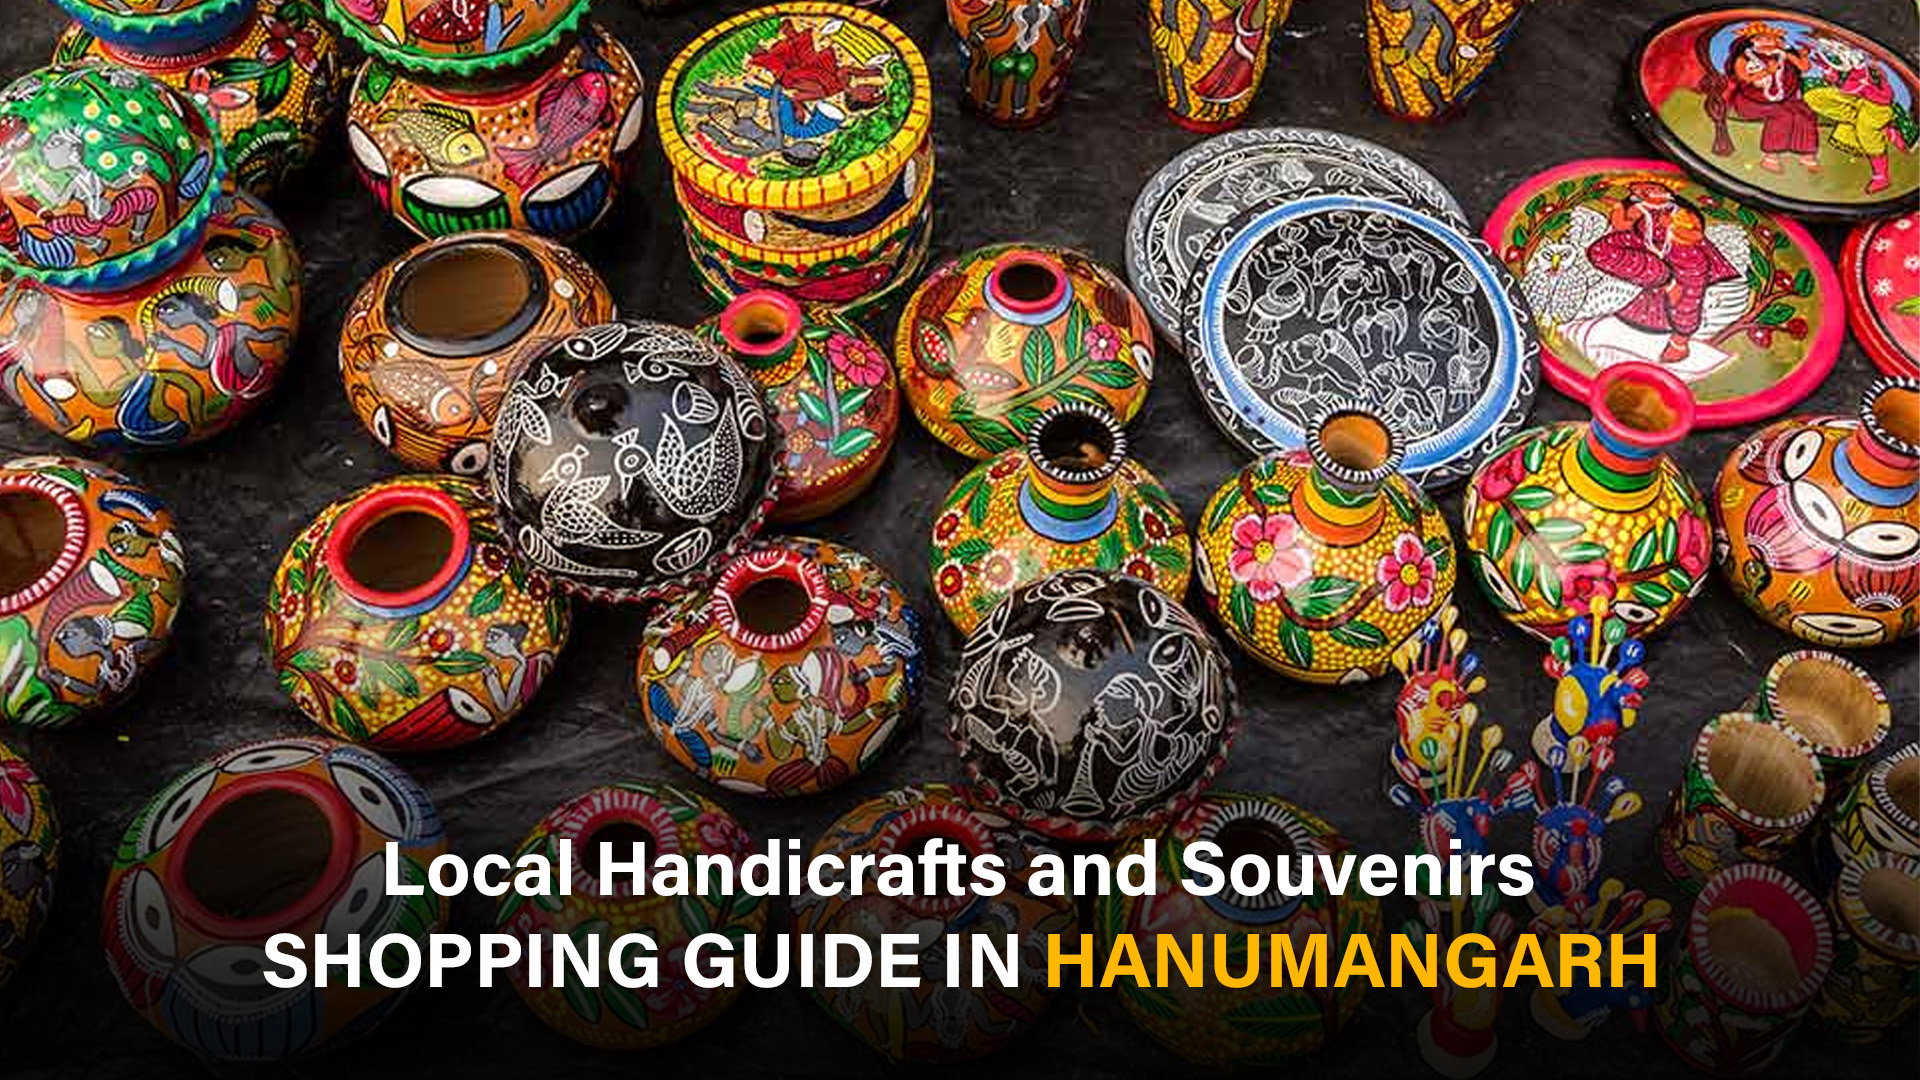 Shopping Guide in Hanumangarh : Local Handicrafts and Souvenirs